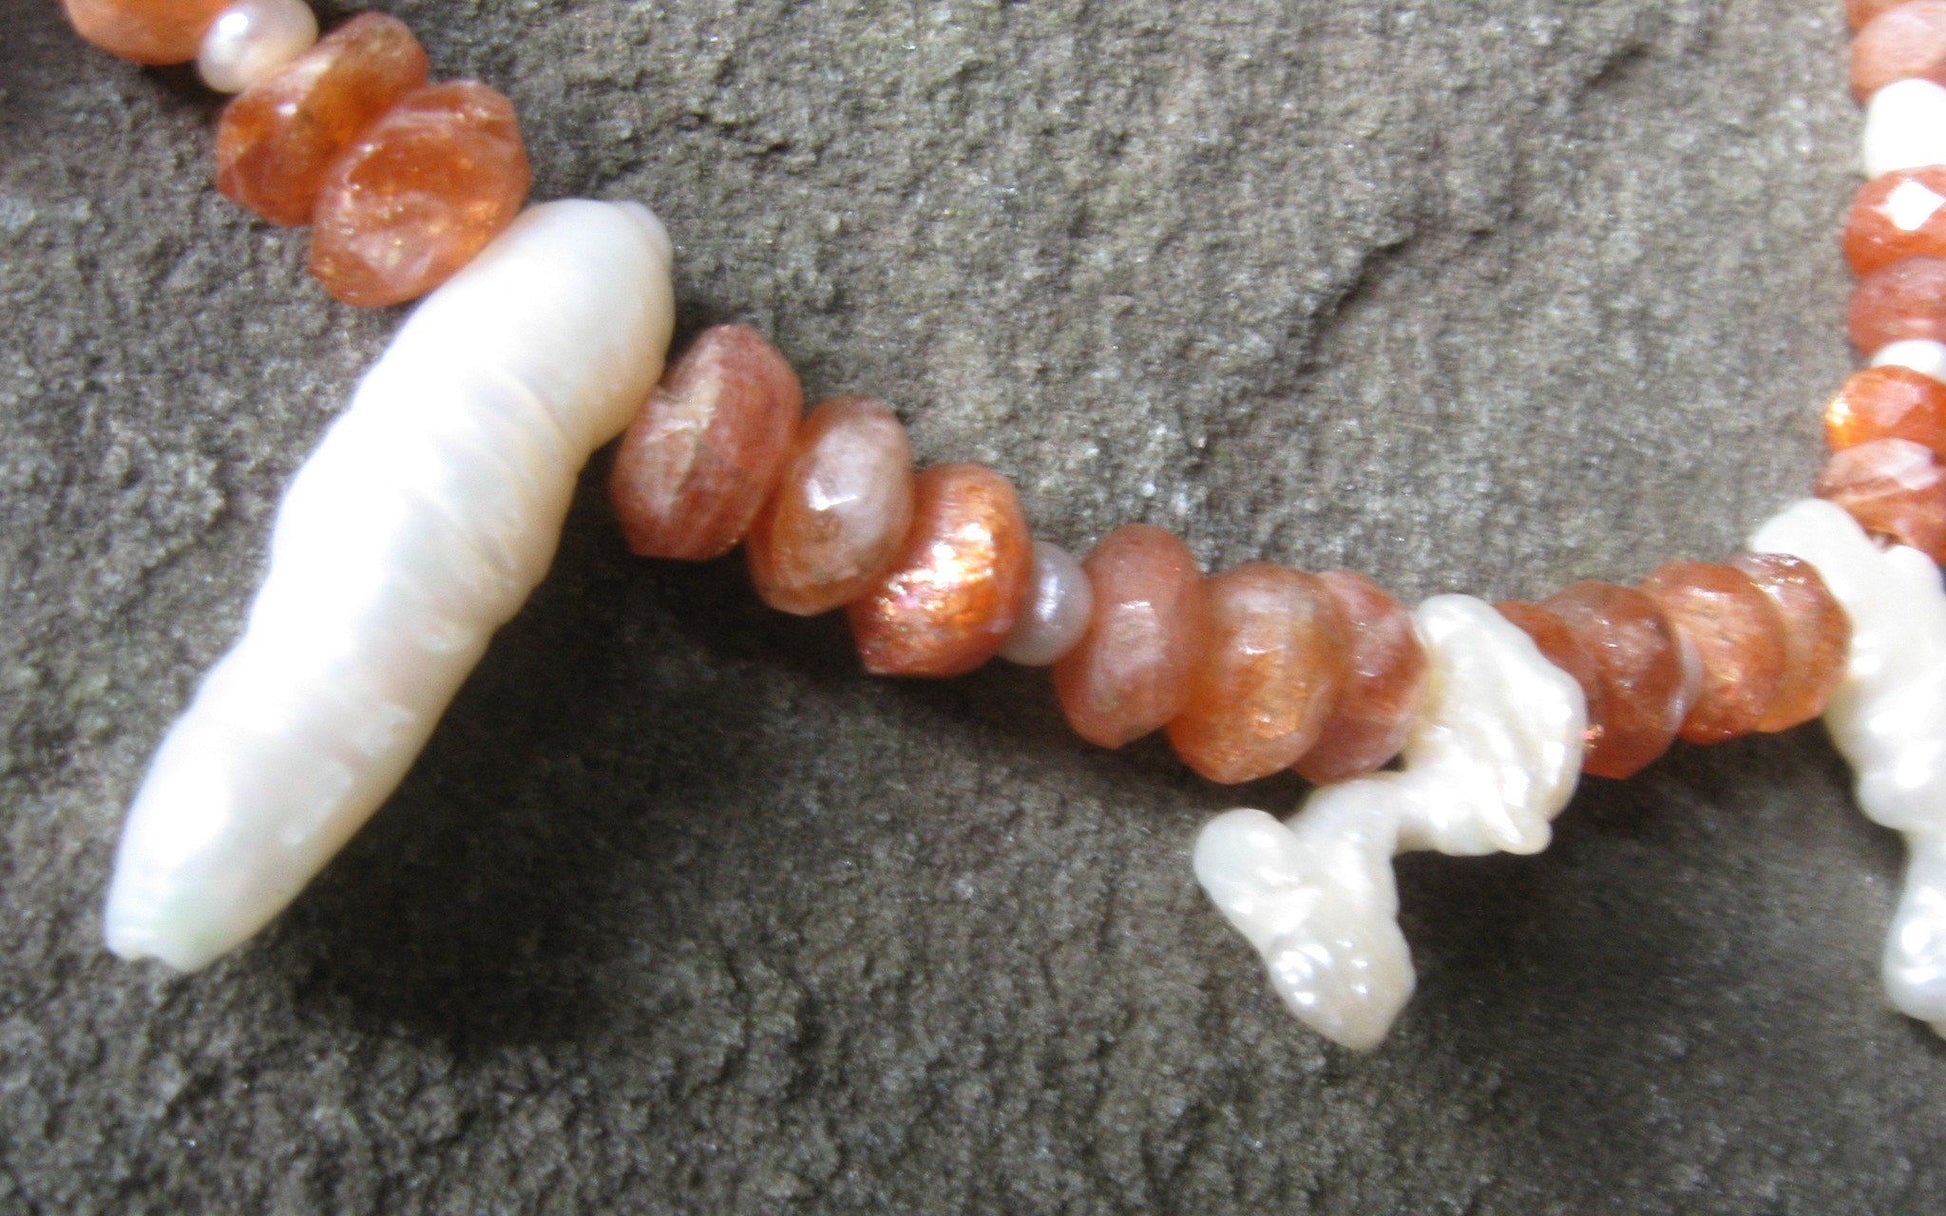 Fire & Ice - Sunstone and Freshwater Pearls | Of Coins & Crystals